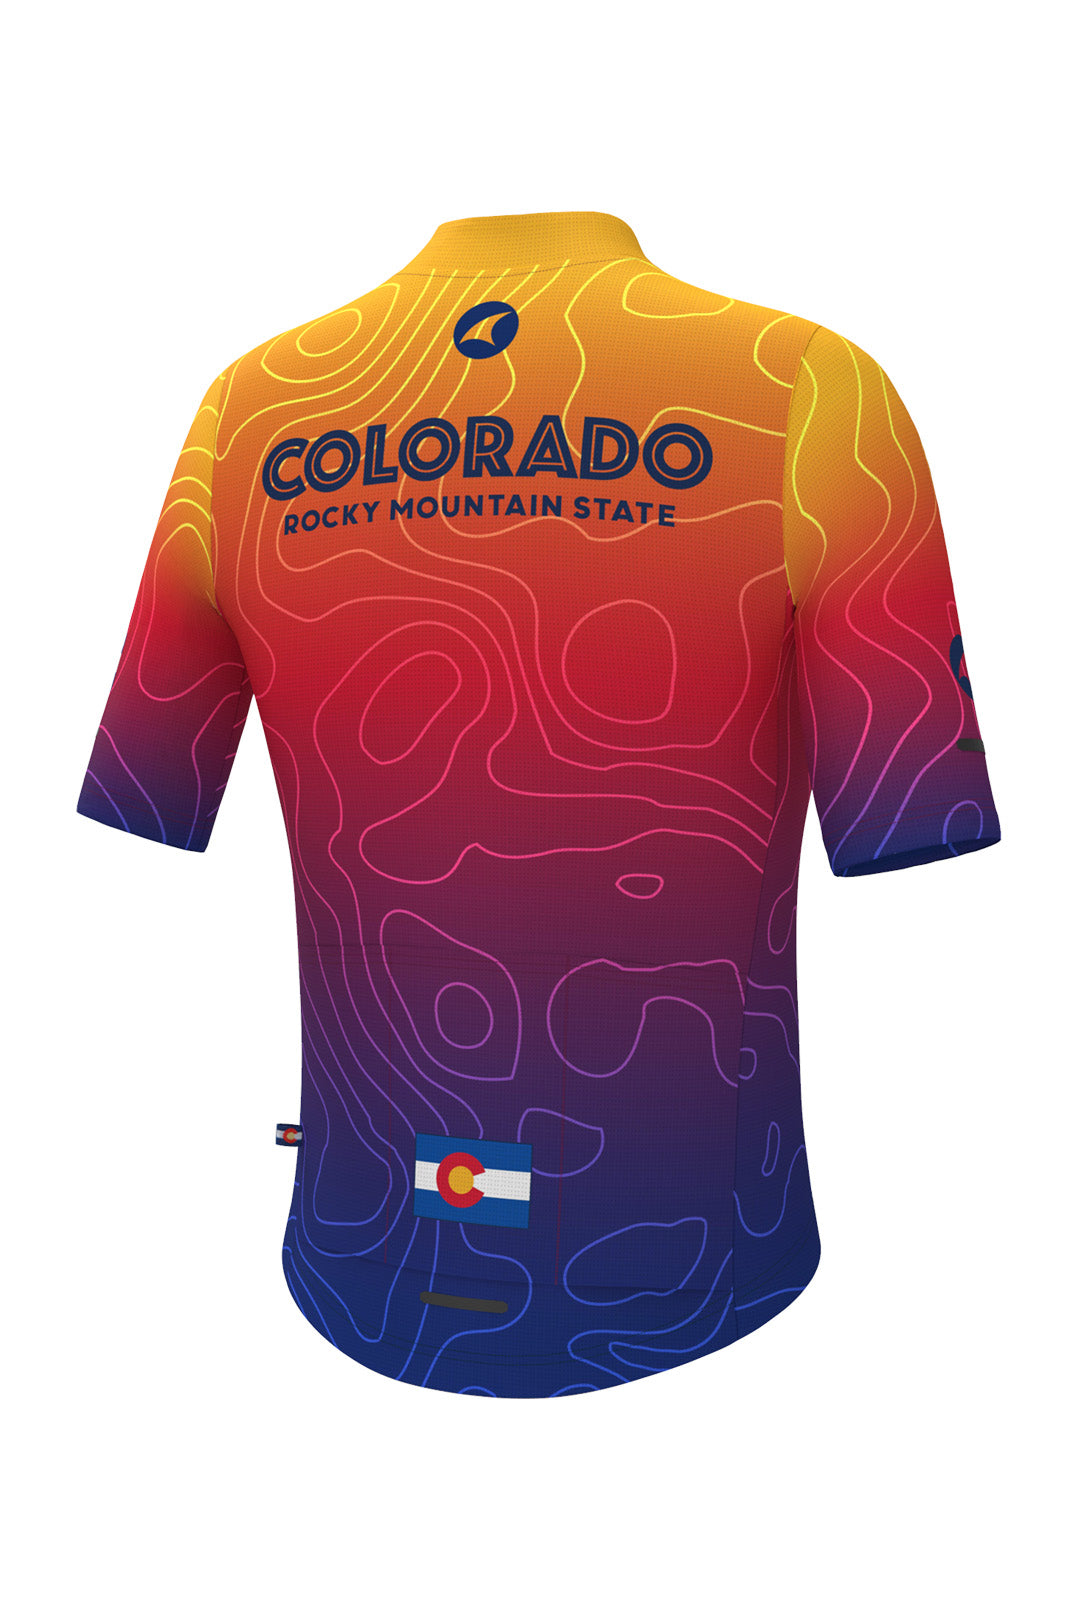 Women's Colorado Cycling Jersey - Ascent Aero Dawn Ombre Back View 